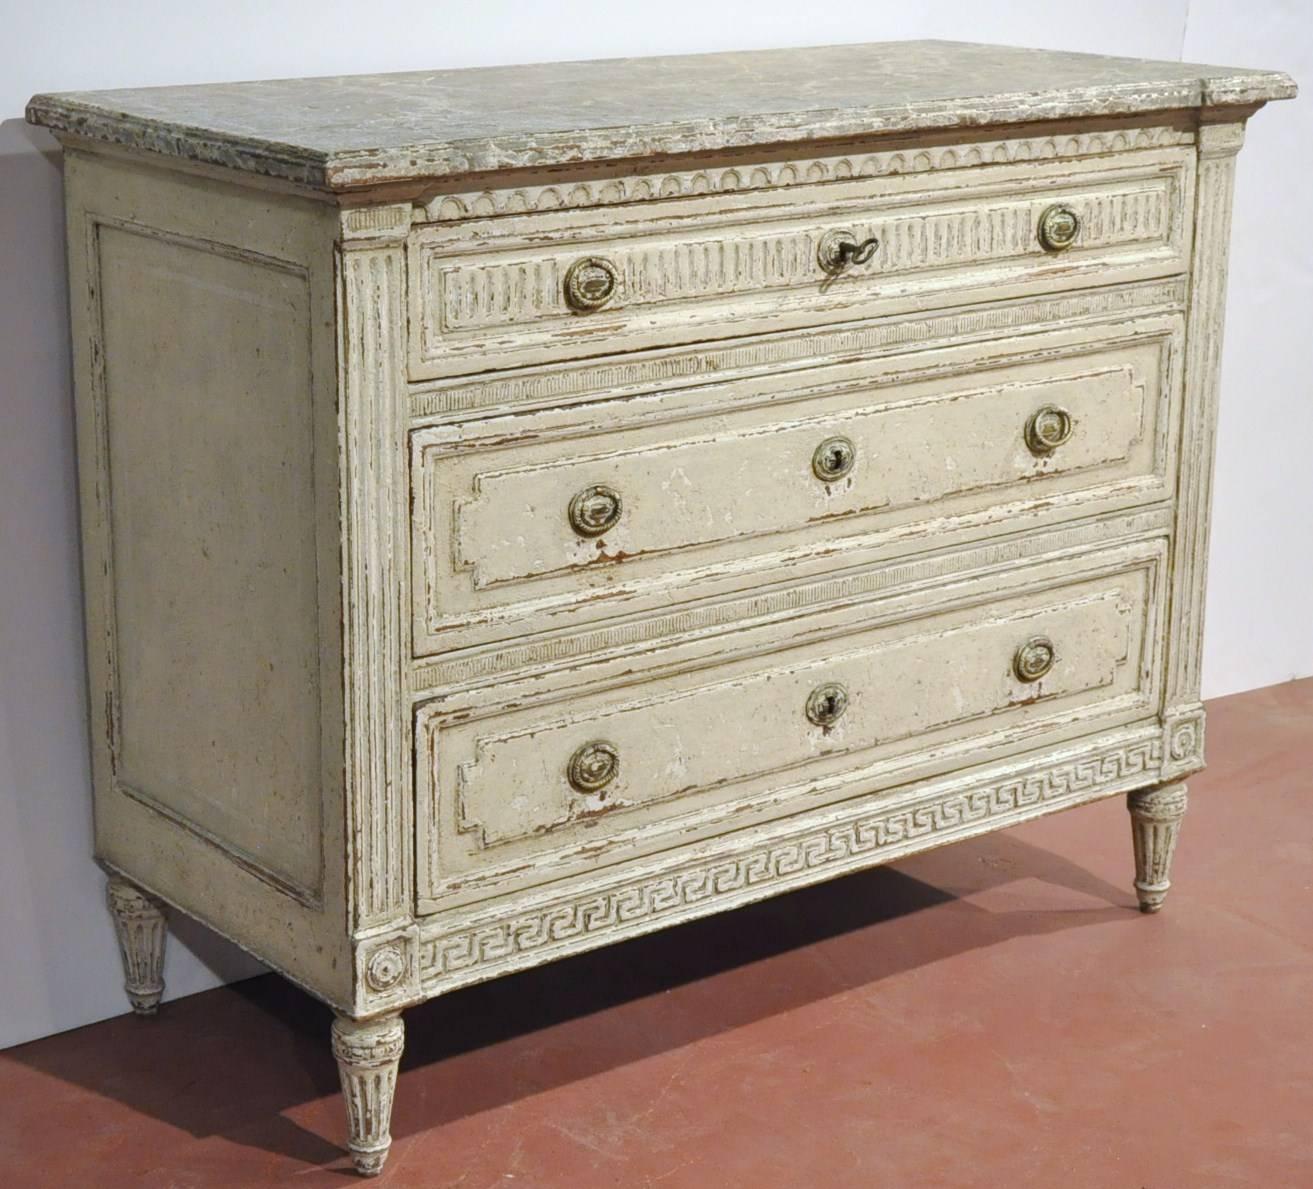 Elegant pair of antique chests of drawers from France, circa 1860; each commode features detailed carved decor on the three drawers across the front including the posts on the sides, and hand carved corner medallions, Greek key design on the apron,